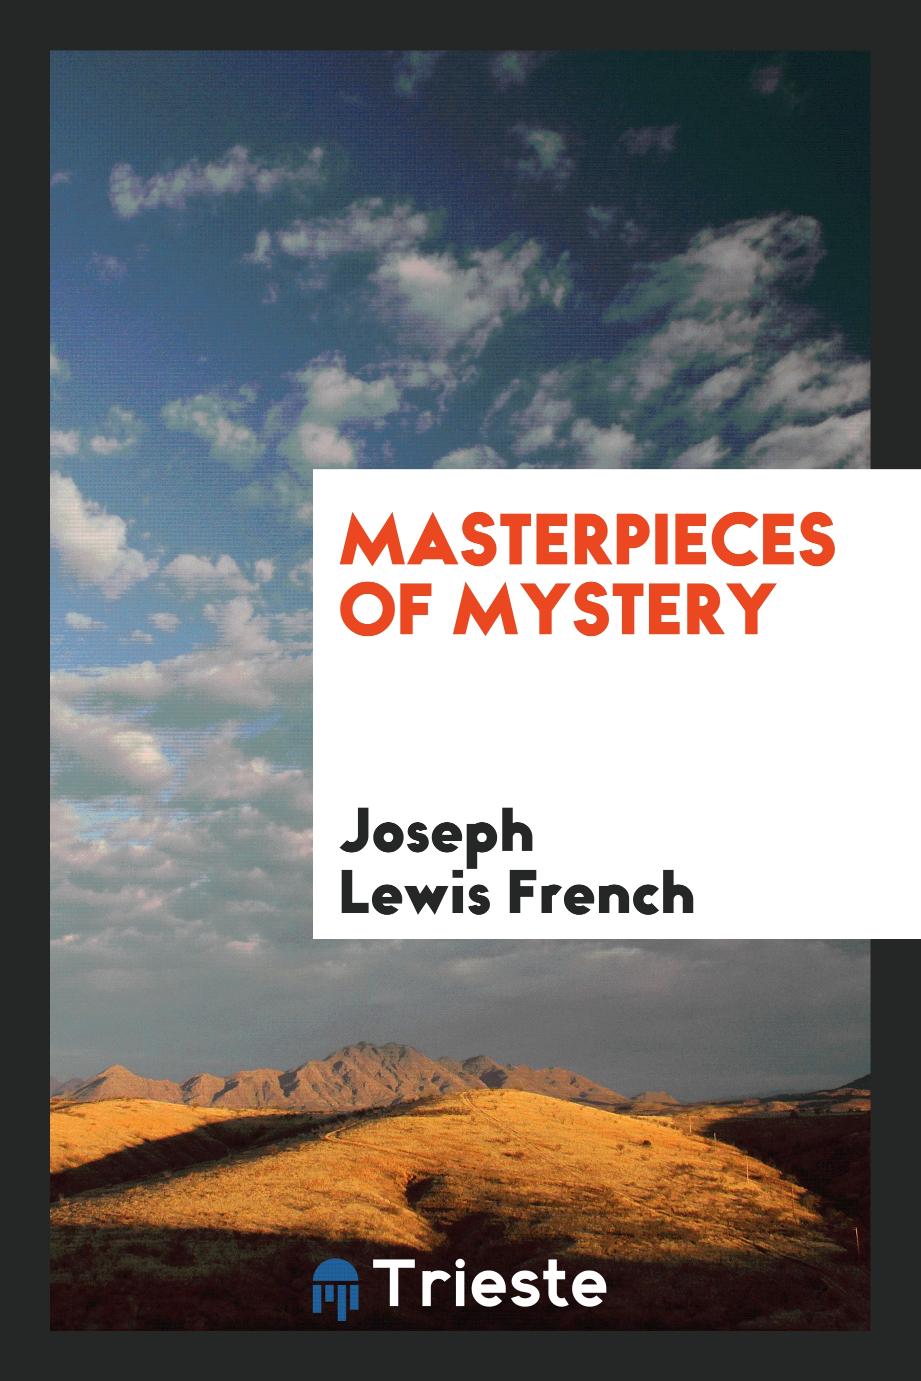 Masterpieces of mystery